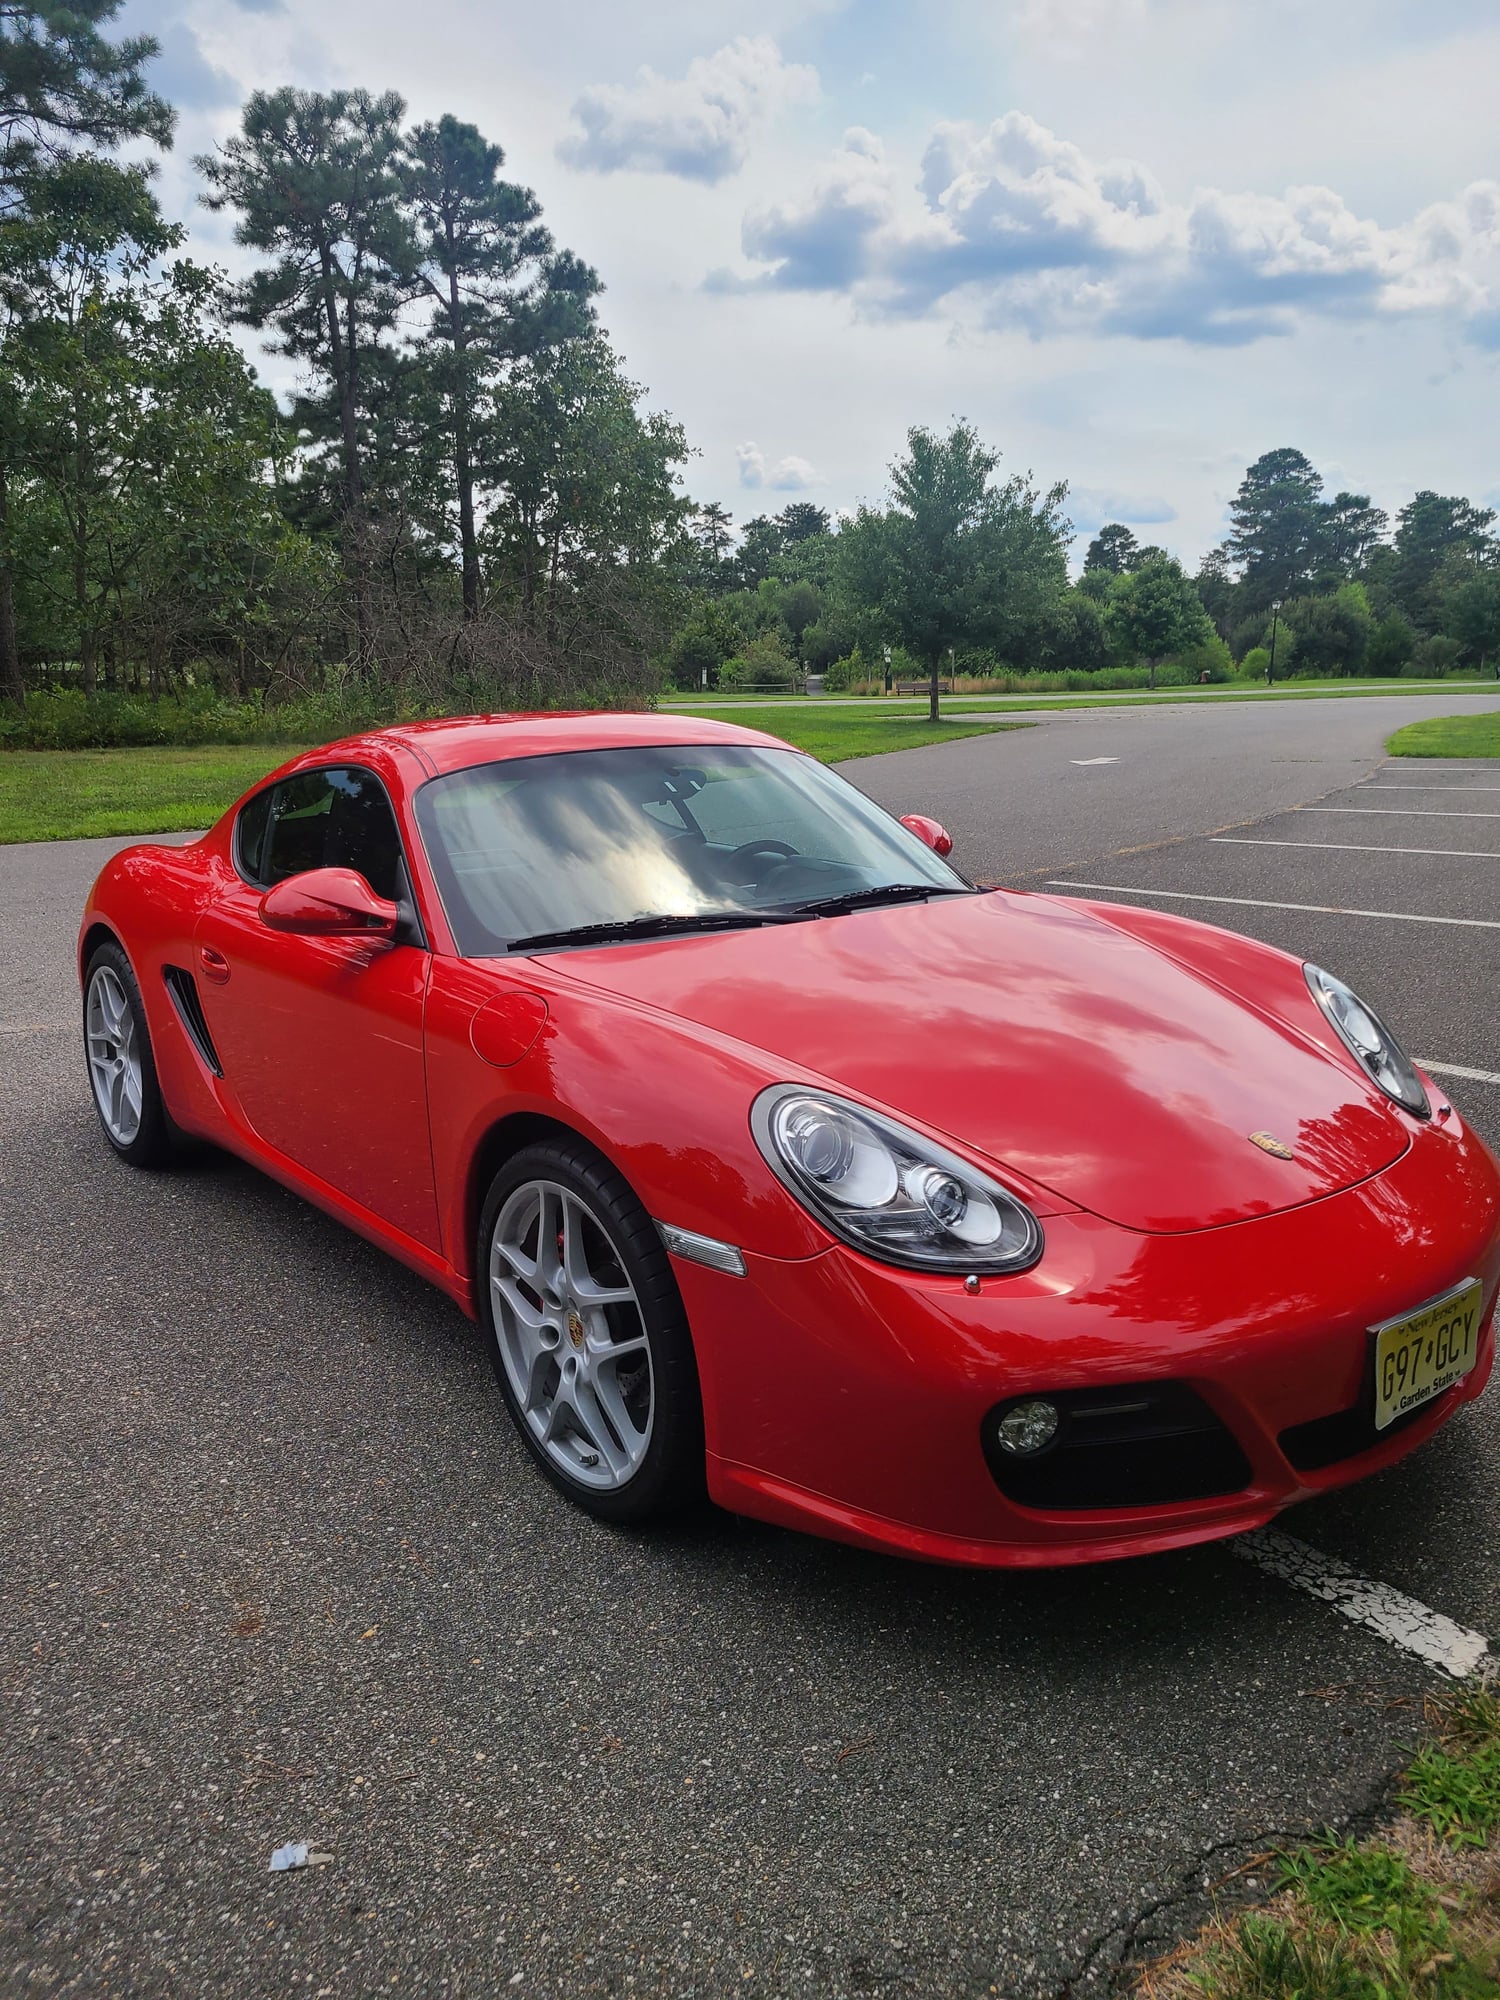 2010 Porsche Cayman - 2010 Cayman S 6MT *Lots* of extras - Used - VIN wp0ab2a84au780710 - 50,569 Miles - 6 cyl - 2WD - Manual - Coupe - Red - Bayville, NJ 08721, United States